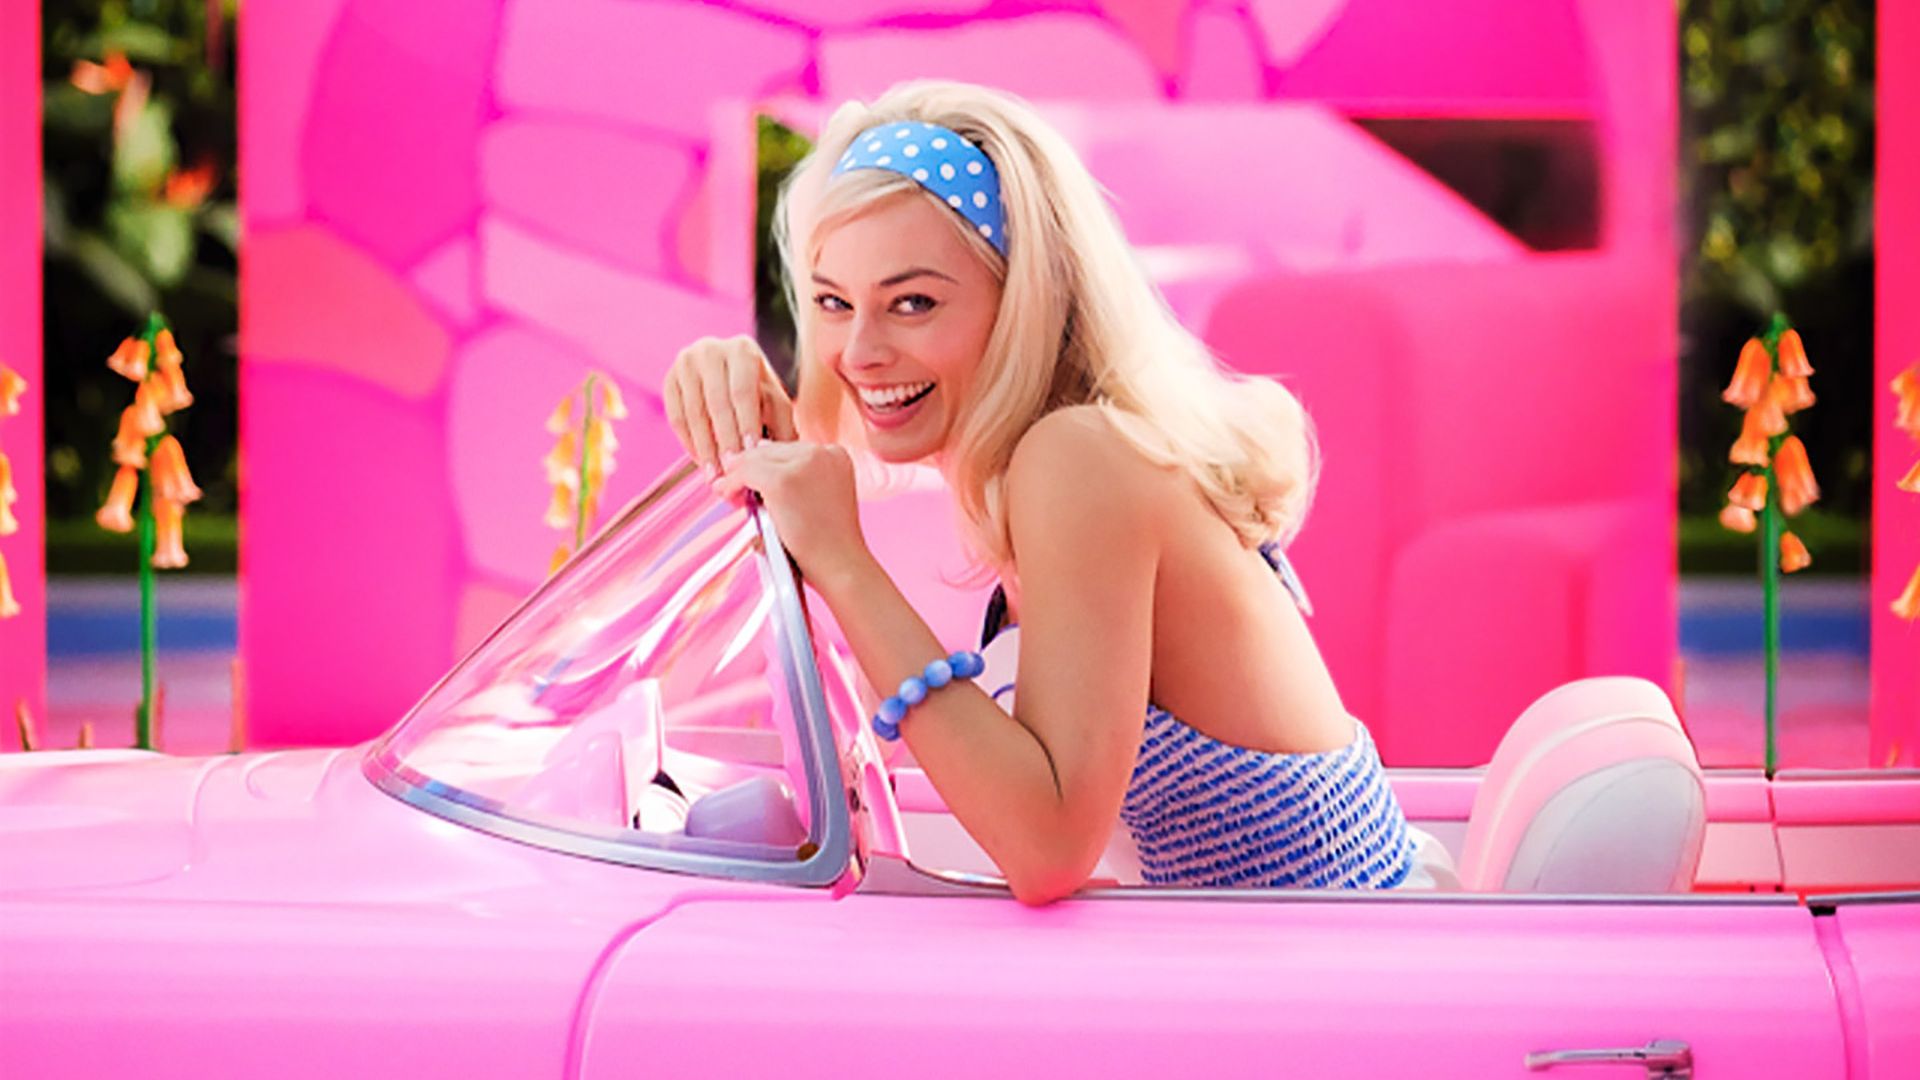 Barbie doll smiles while sitting in a pink car in Margot Robbie's solo movie